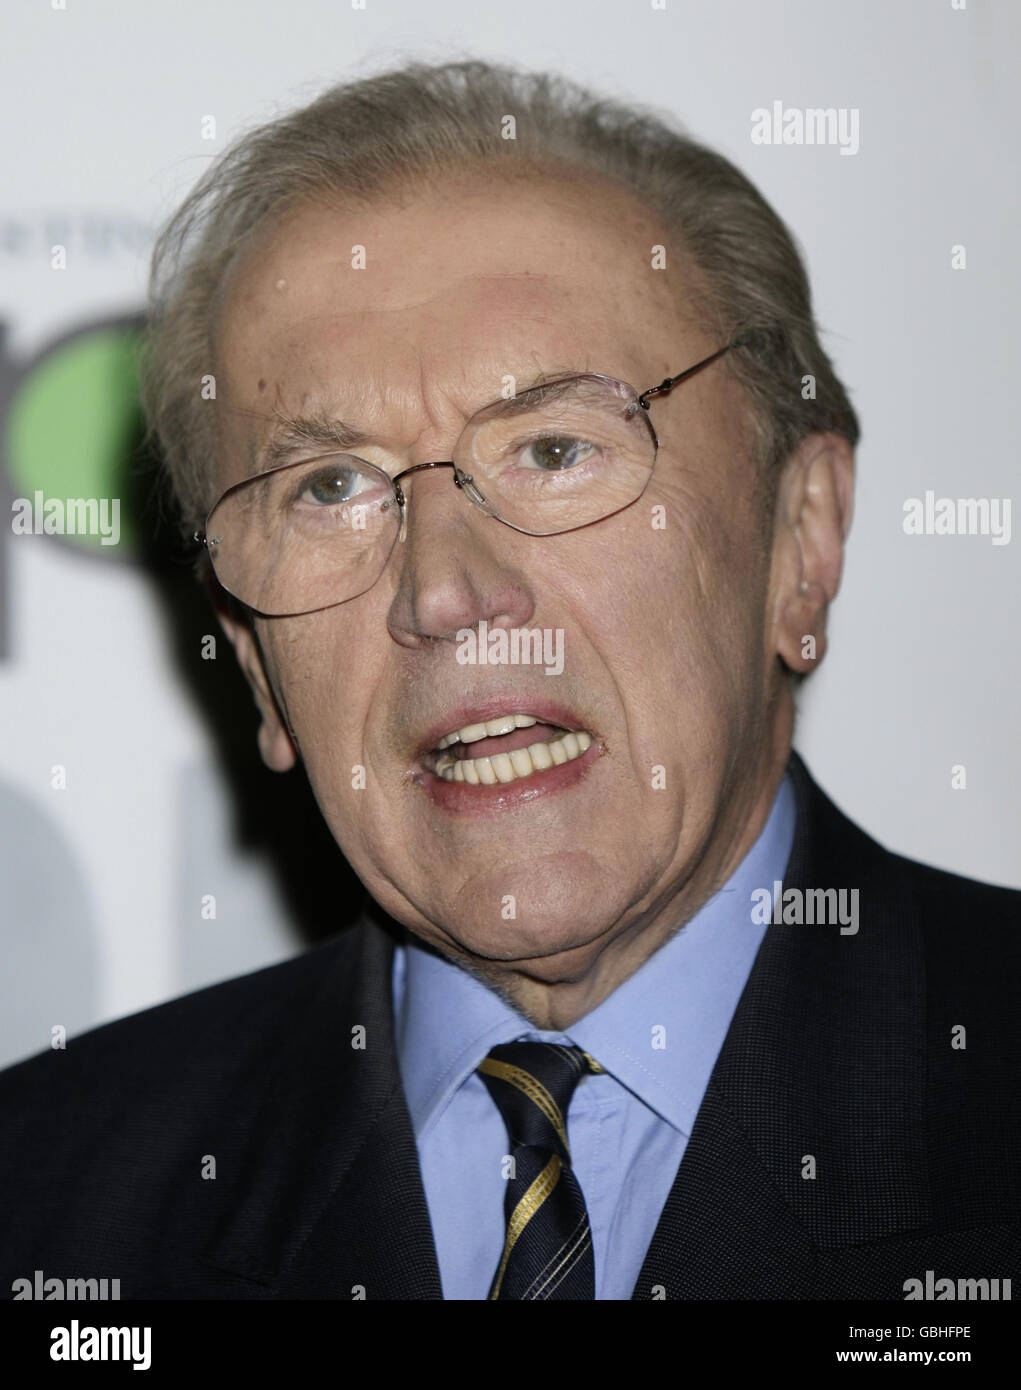 Sir David Frost, who was awarded the Harvey Lee award for outstanding achievement, arriving for the Broadcasting Press Guild Television and Radio Awards, at the Theatre Royal in central London. Stock Photo